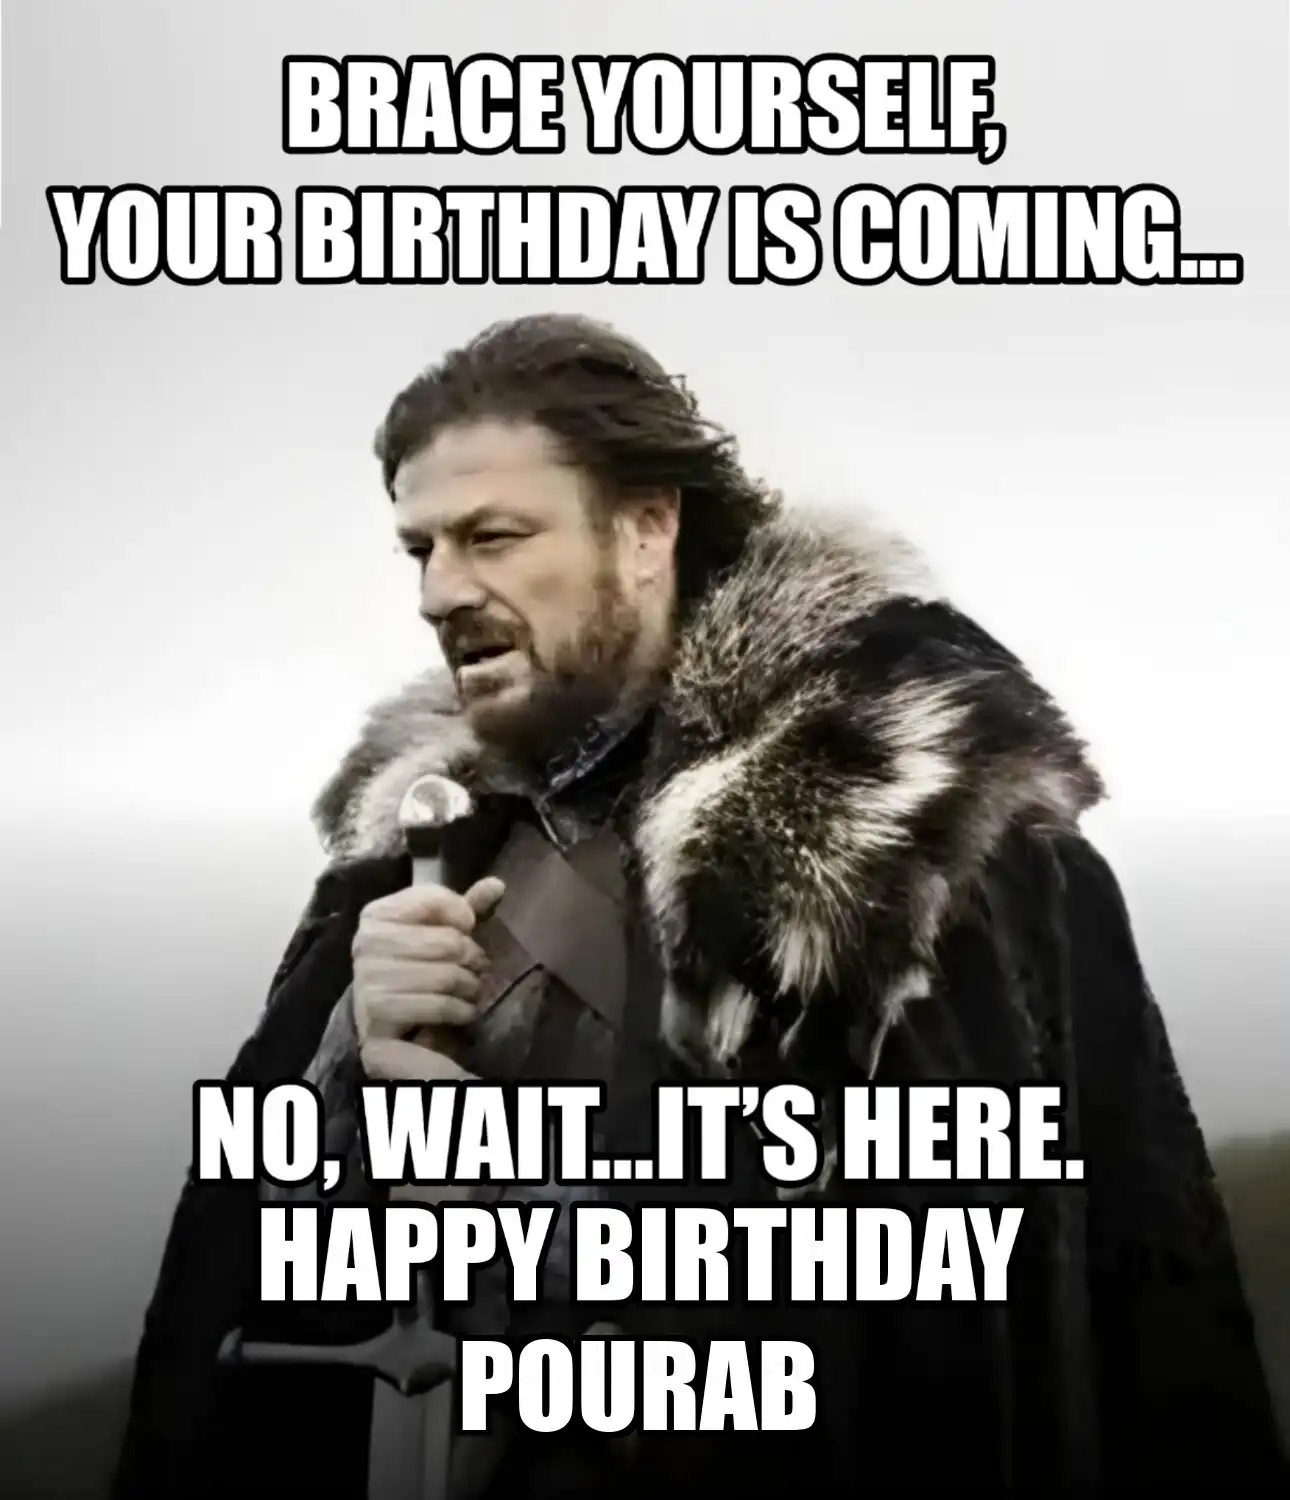 Happy Birthday Pourab Brace Yourself Your Birthday Is Coming Meme